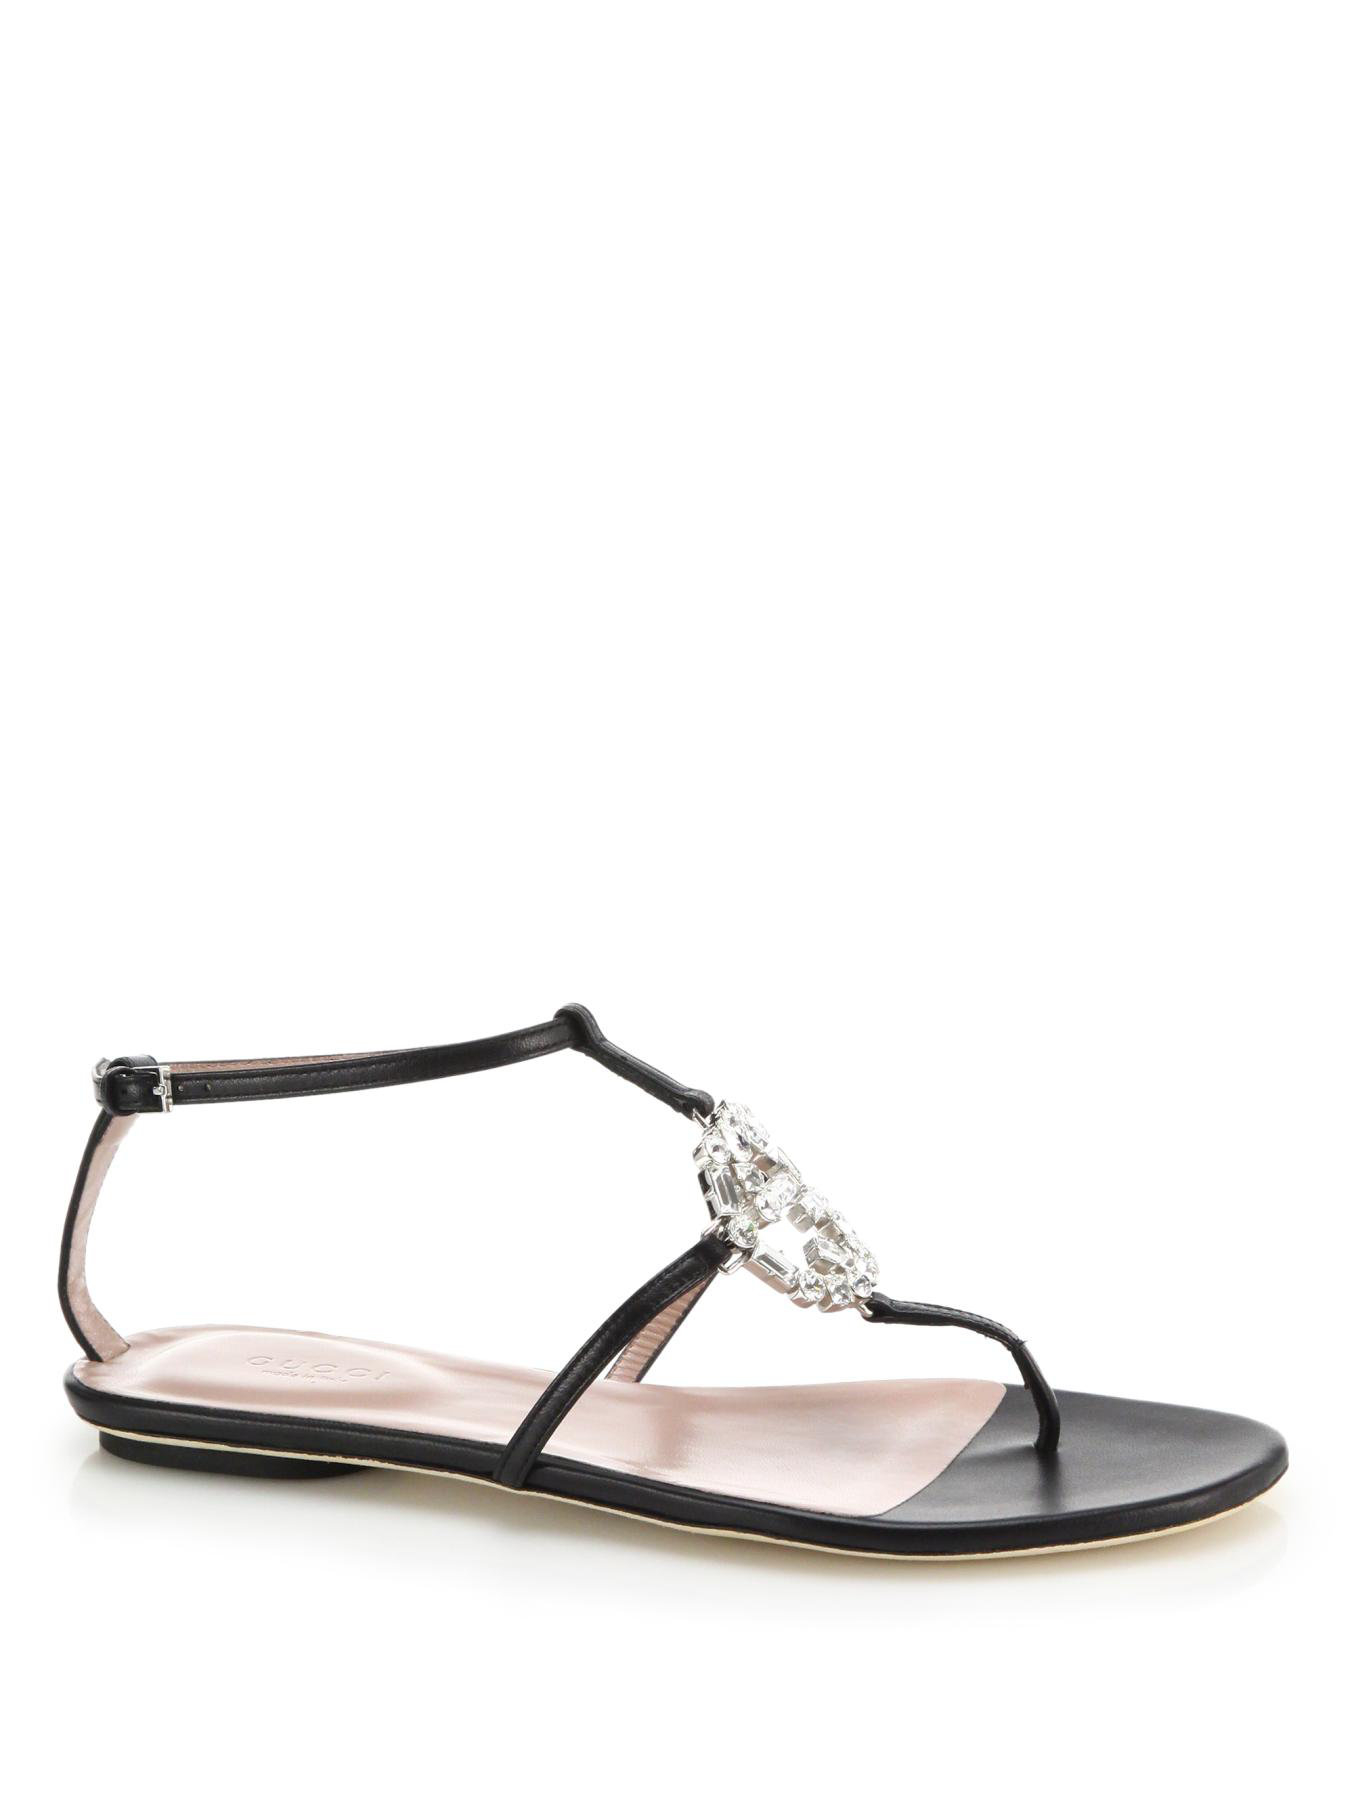 Gucci Gg Sparkling Crystal & Leather Logo Sandals in Black | Lyst